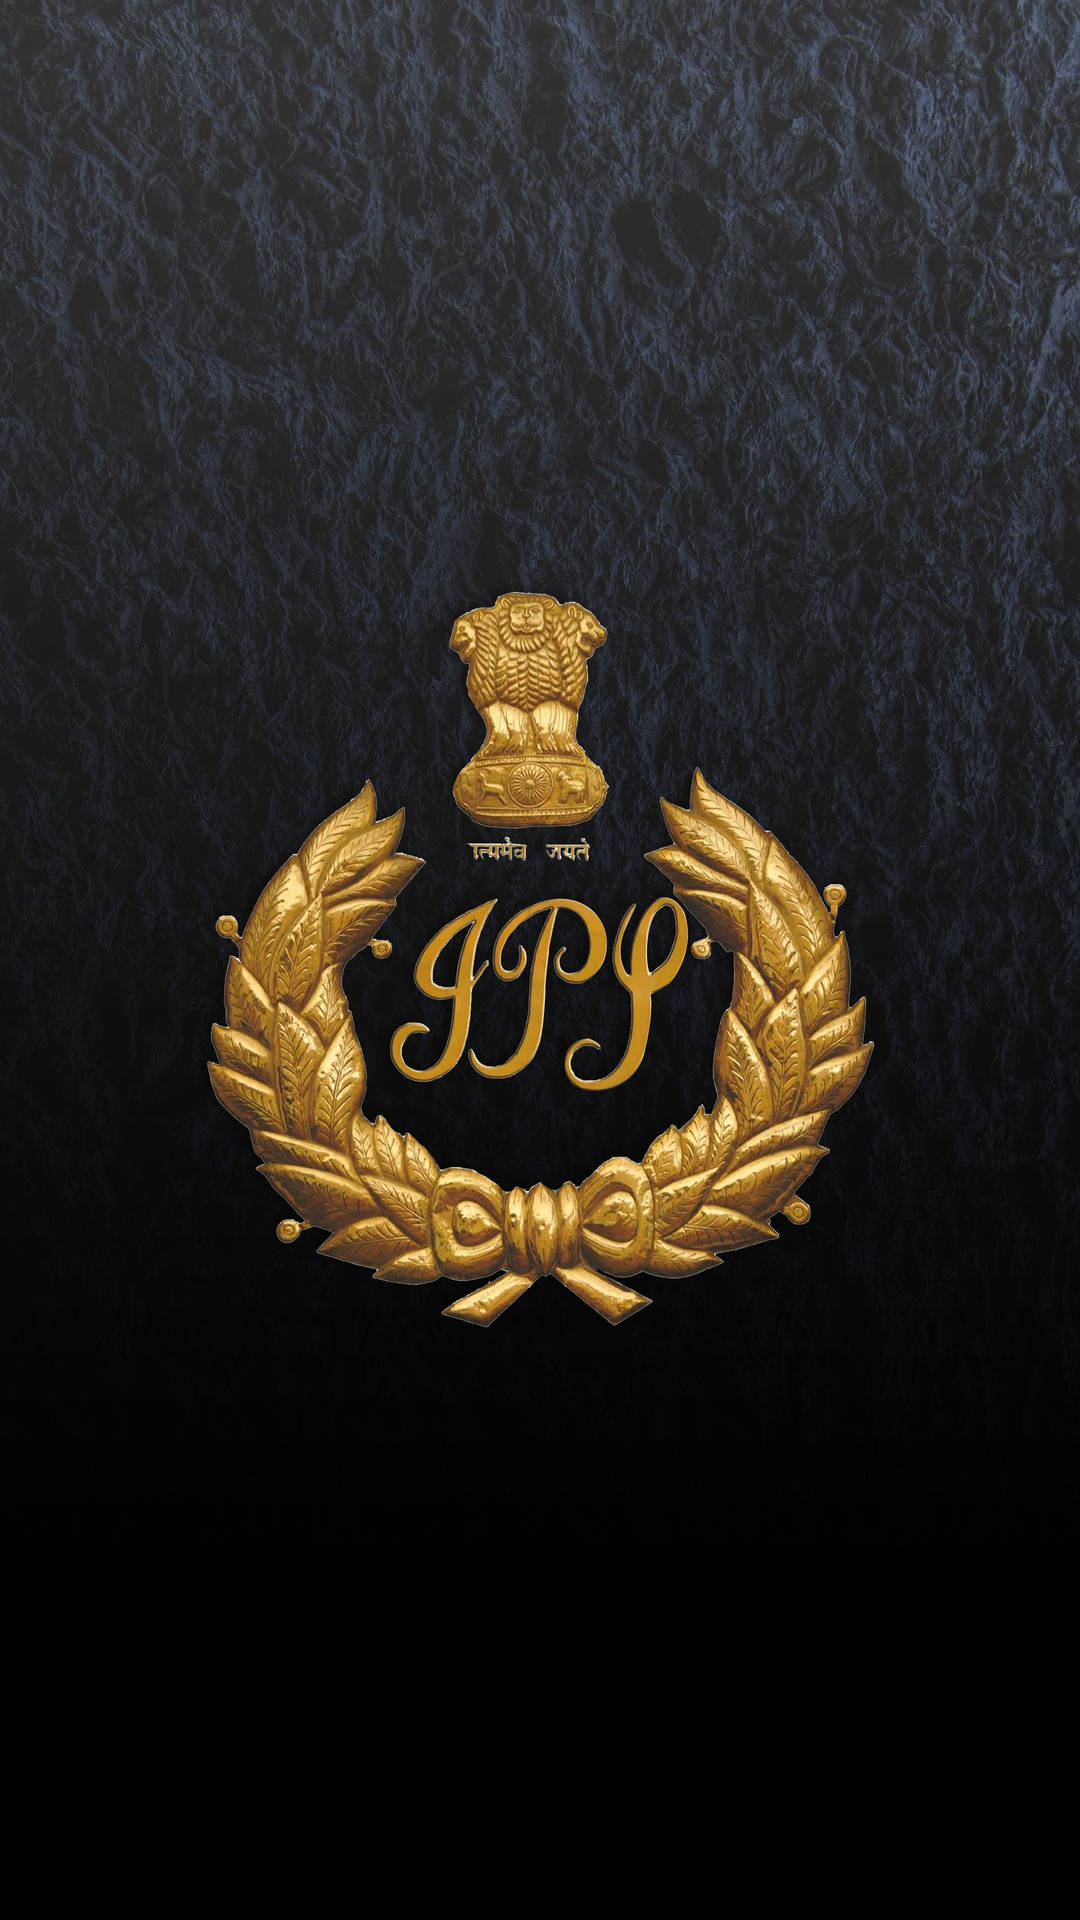 The Best 16 Indian Police Officer Ips For Mobile  learnshapeviral IPS  Logo HD phone wallpaper  Peakpx